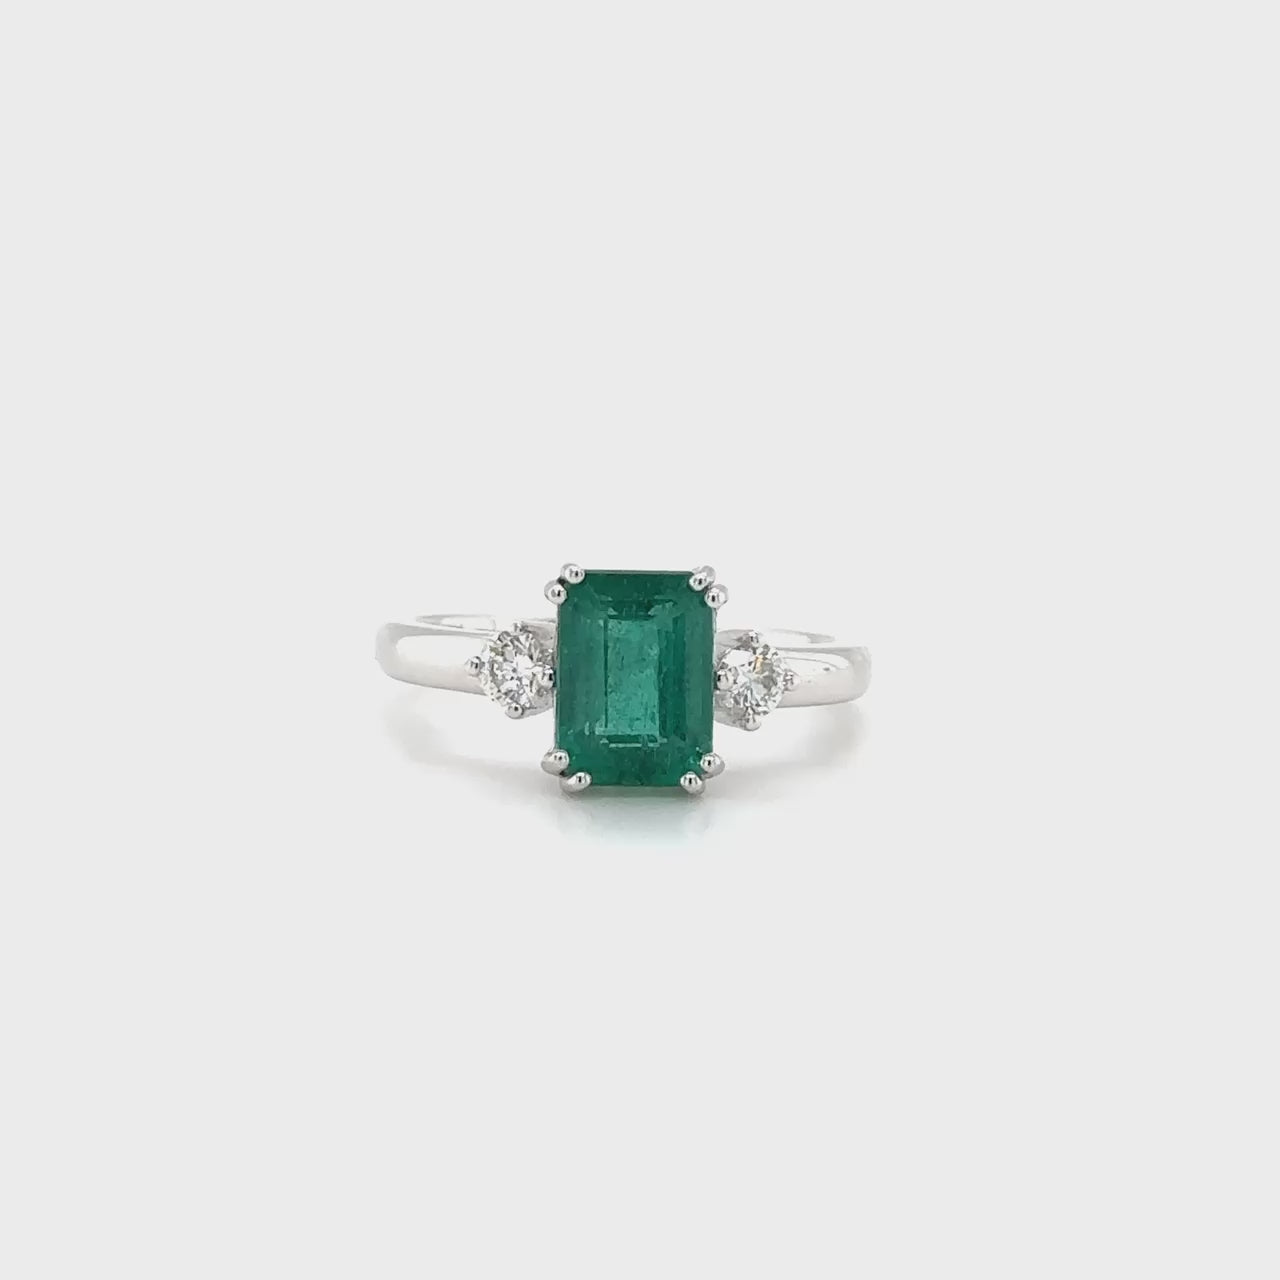 Emerald, Diamond, Trilogy Ring: A stunning piece of jewelry showcasing the brilliance of emeralds and diamonds in a trilogy setting.